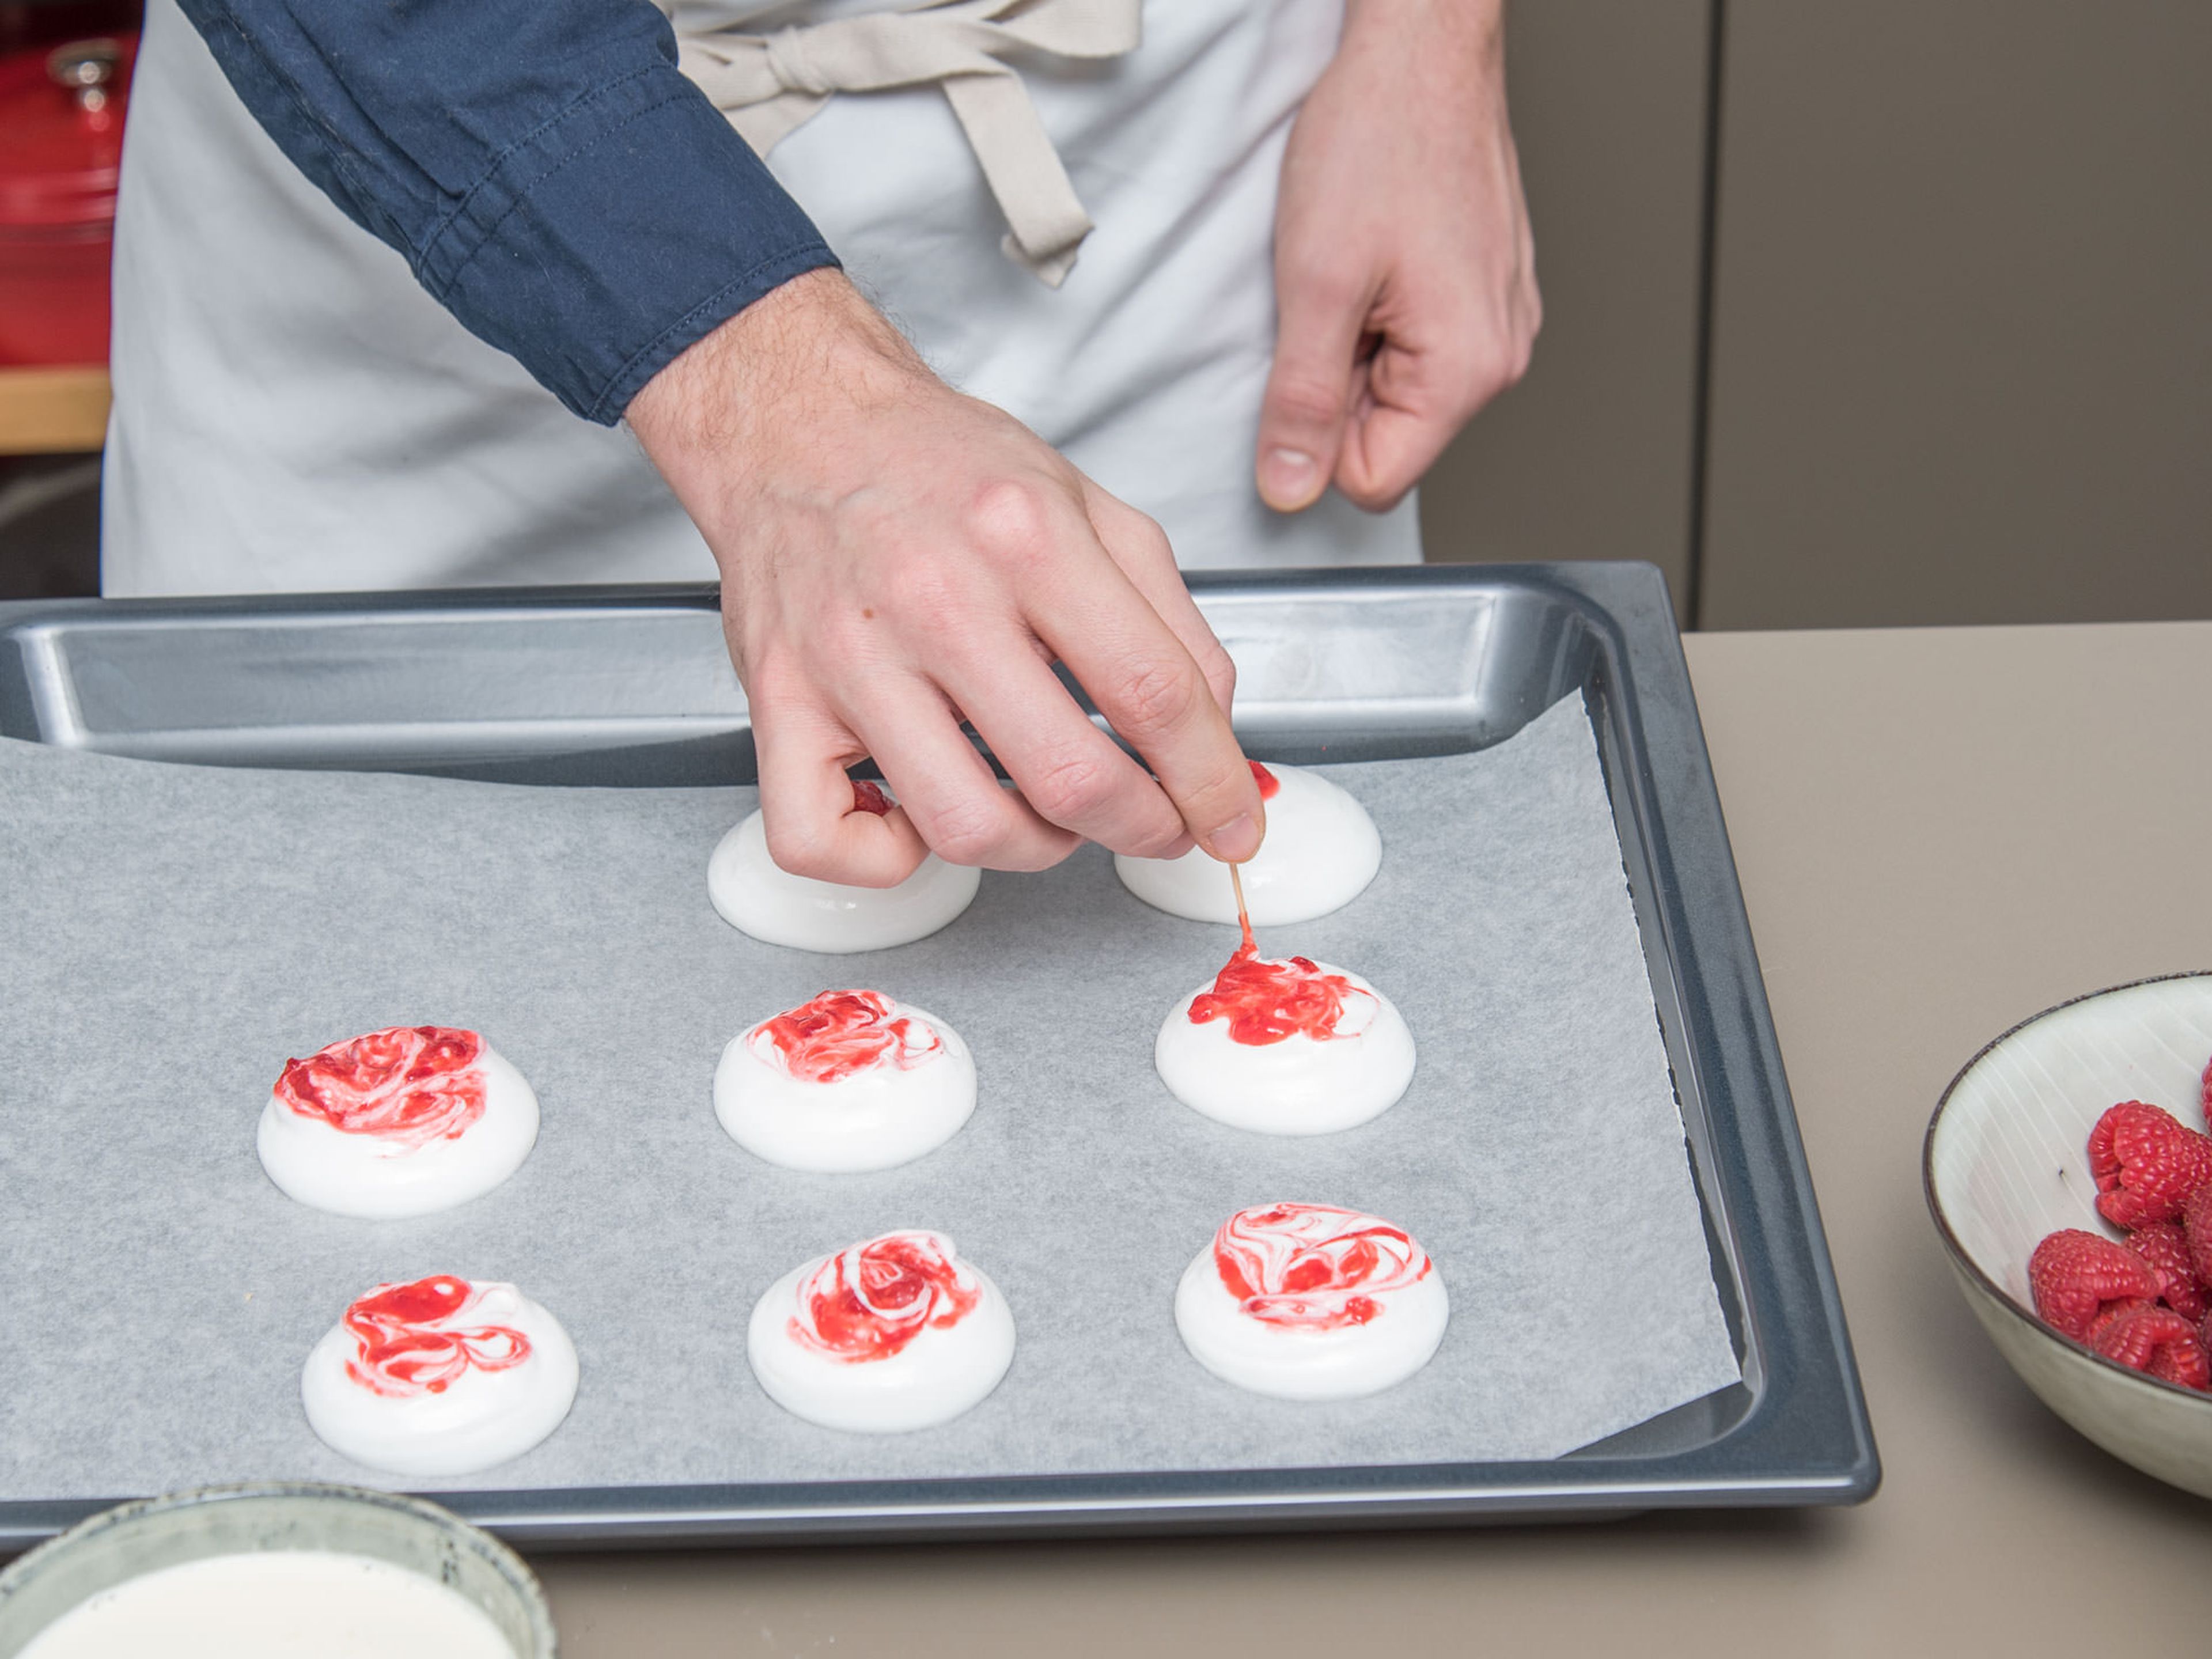 Add meringue to a piping bag. Pipe 5-cm/2 in. wide circles onto a parchment-lined baking sheet. Leave some space between. Top with some raspberry purée and swirl with a tooth pick.